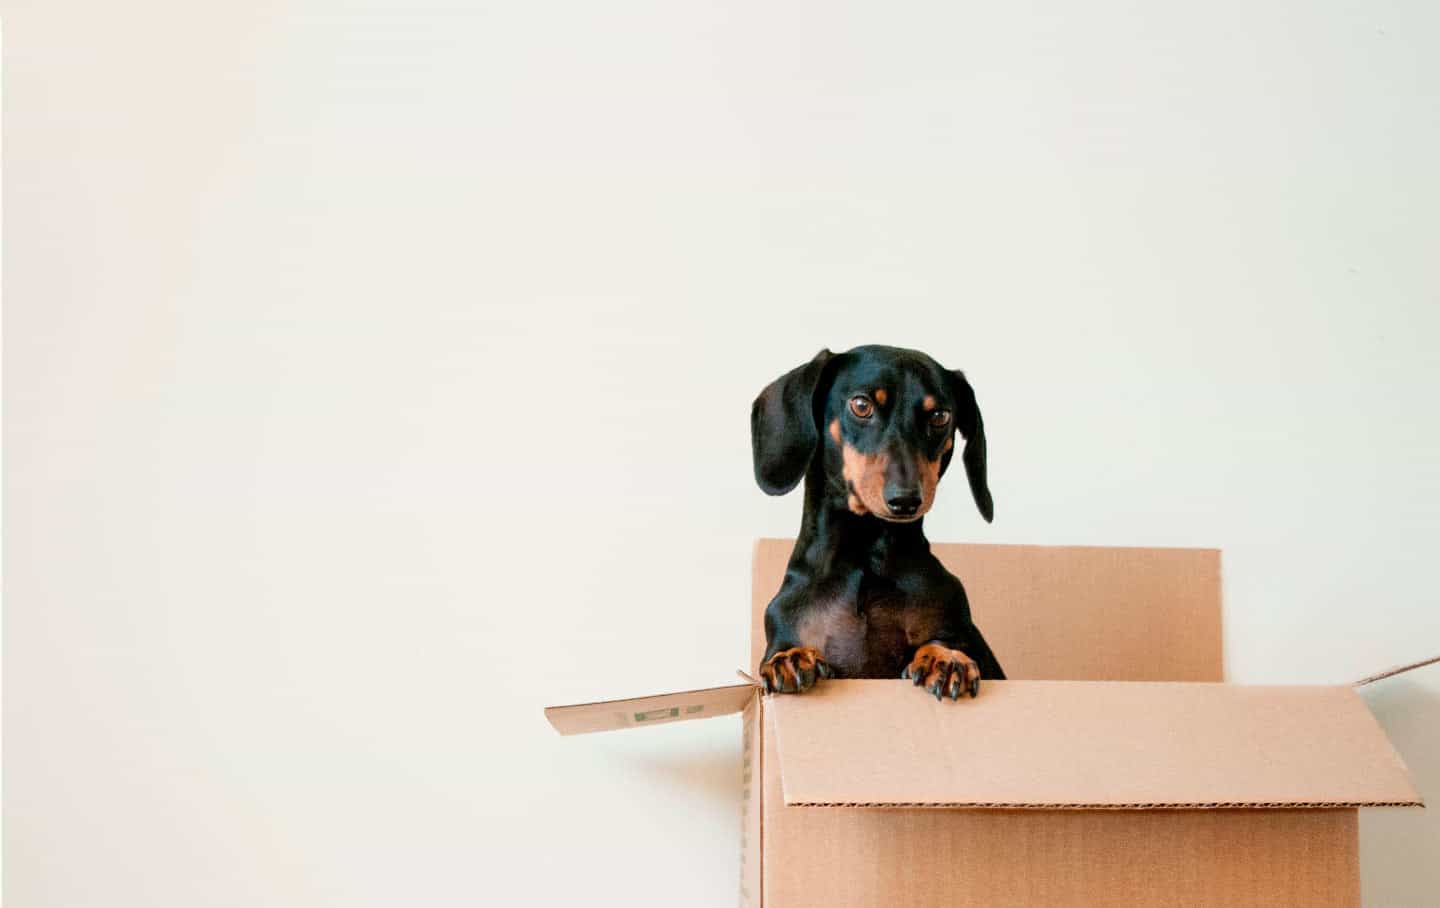 Best Moving Company Tallahassee